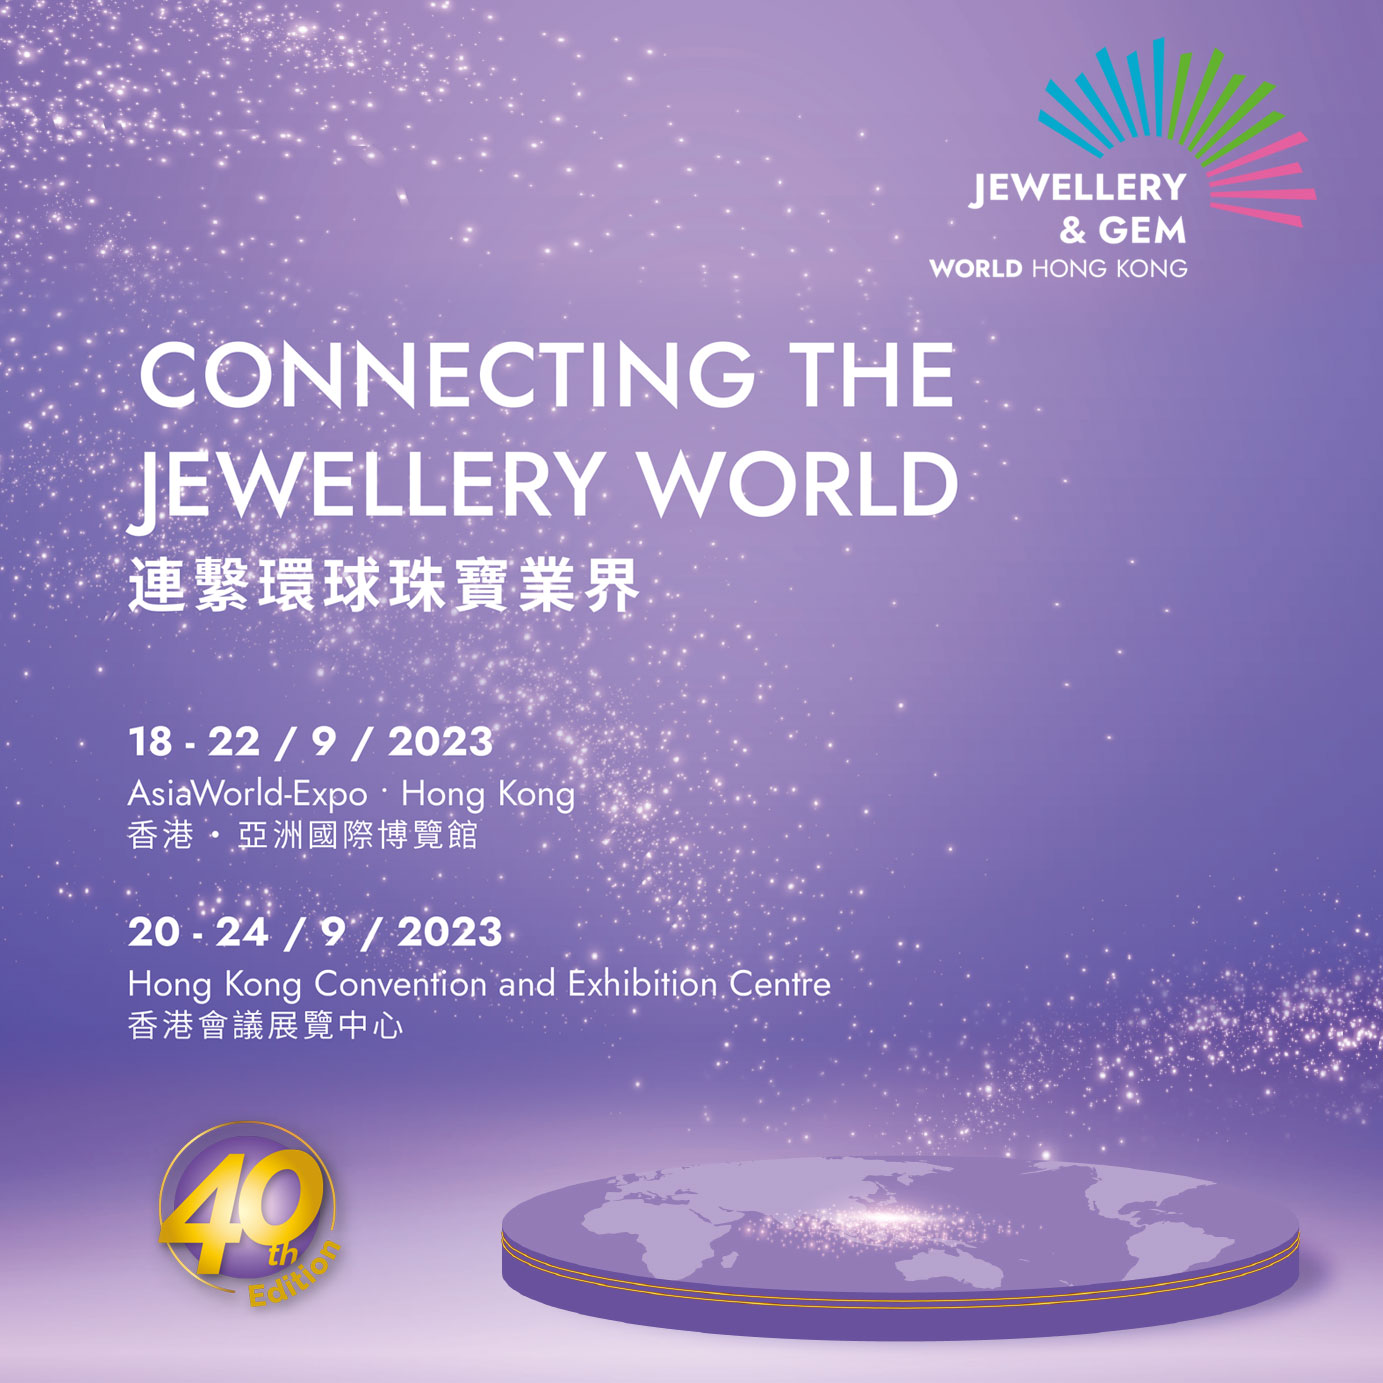 International participation roars back at the biggest jewellery show in the world